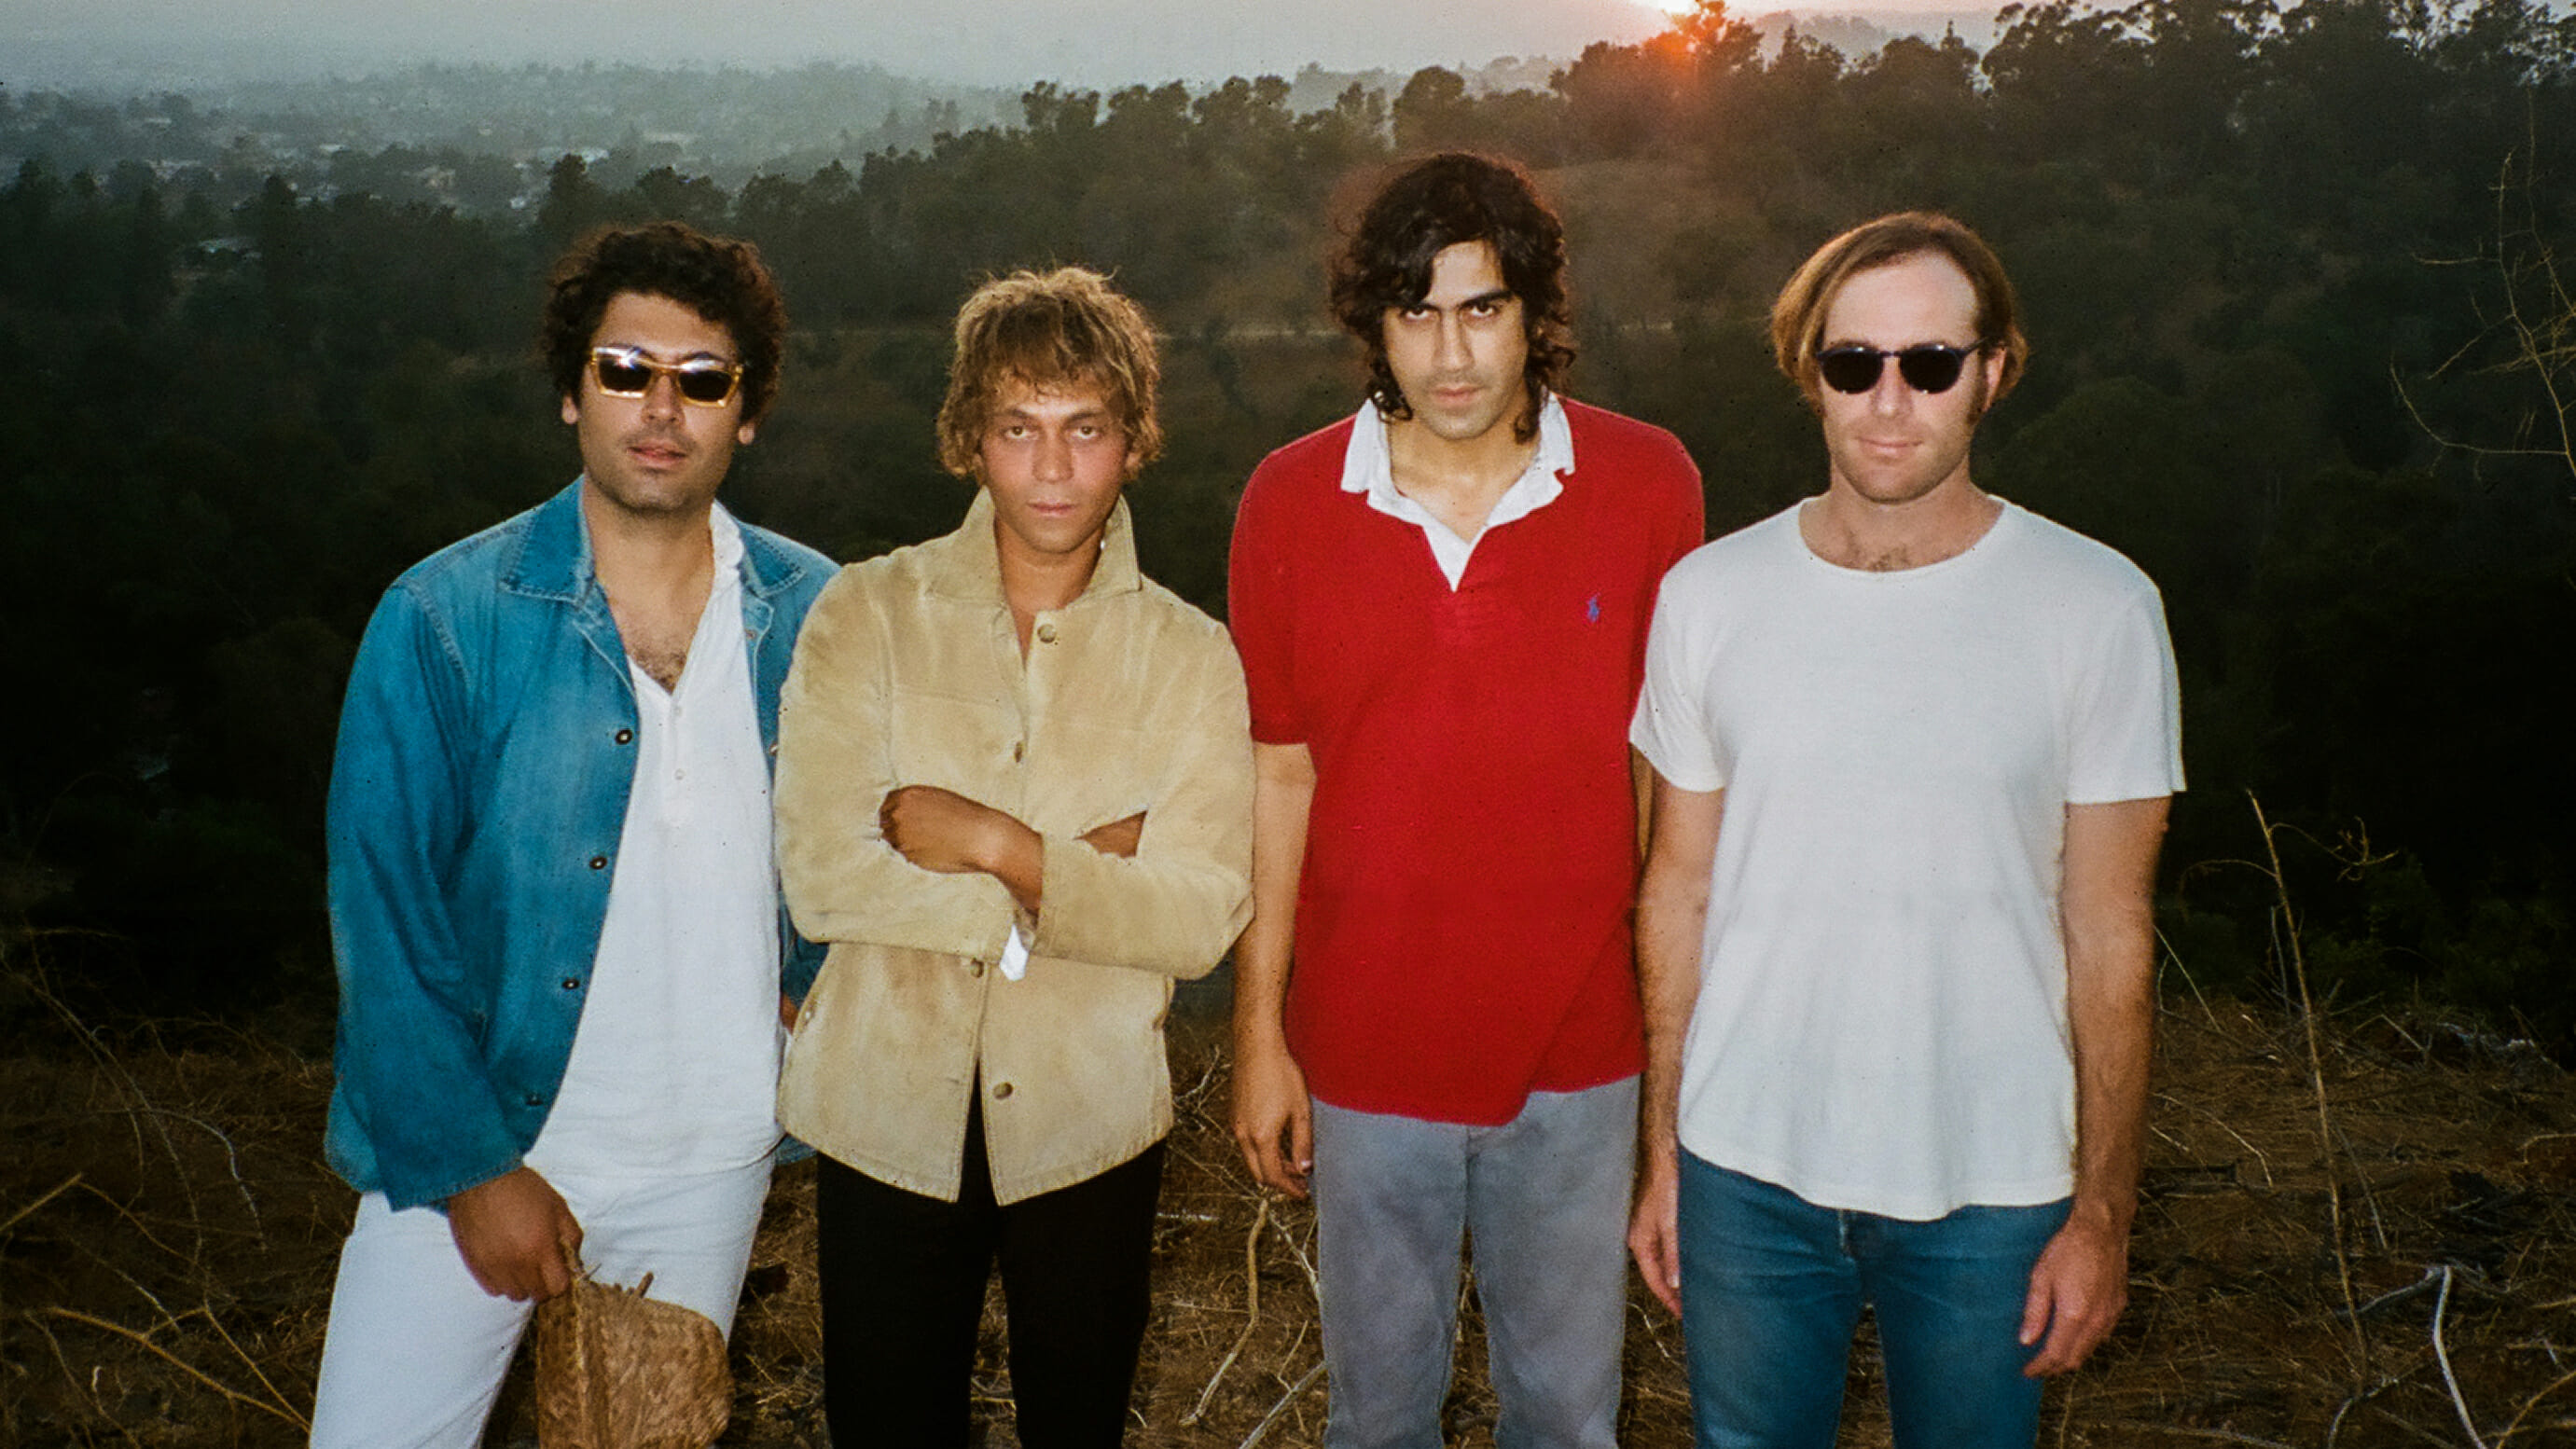 Allah Las Do Sunny Psychedelic Pop in “In The Air,” Lead Single off New Album